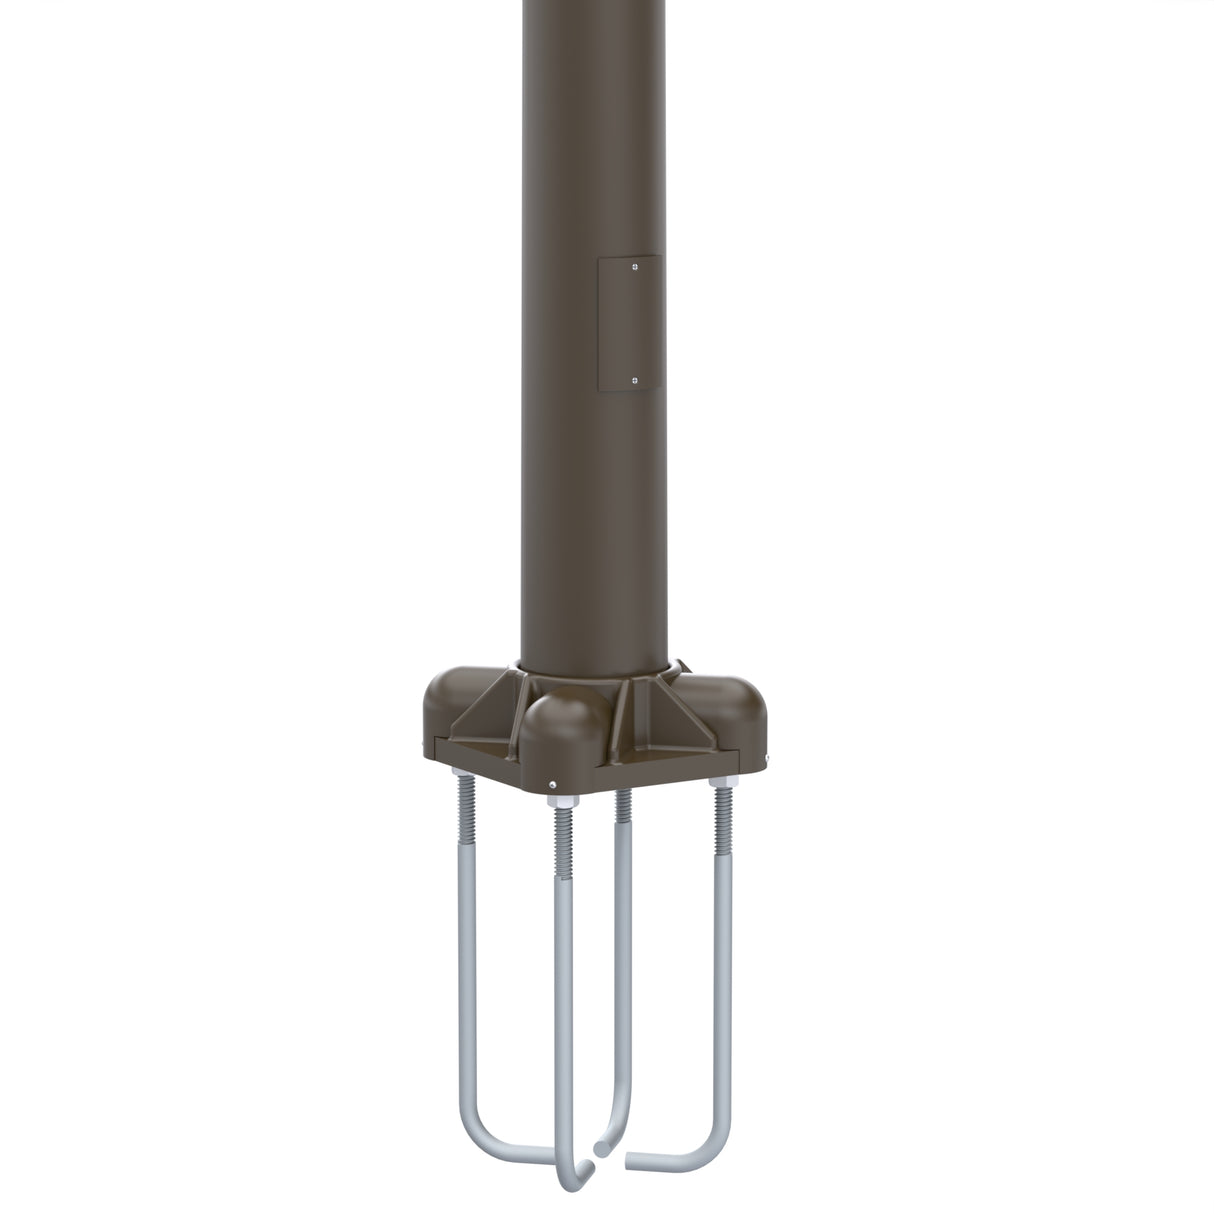 12' Tall x 5.0" Base OD x 3.0" Top OD x 0.125" Thick, Round Tapered Aluminum, Anchor Base Light Pole